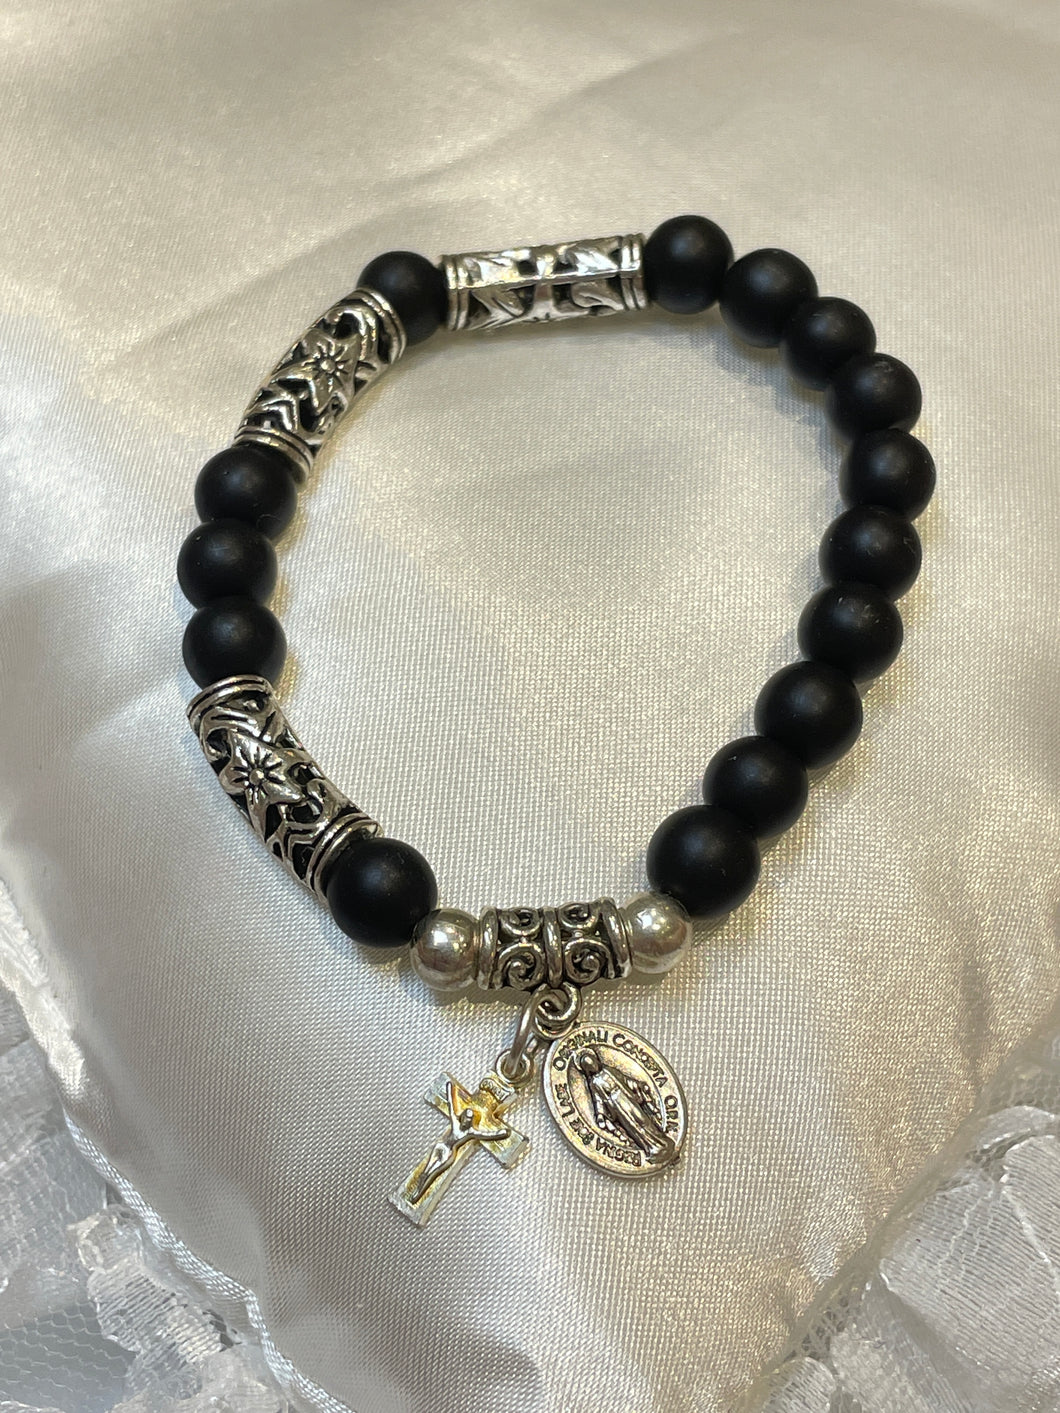 Black Gemstone Rosary Bracelet with Miraculous Medal and Crucifix Charms